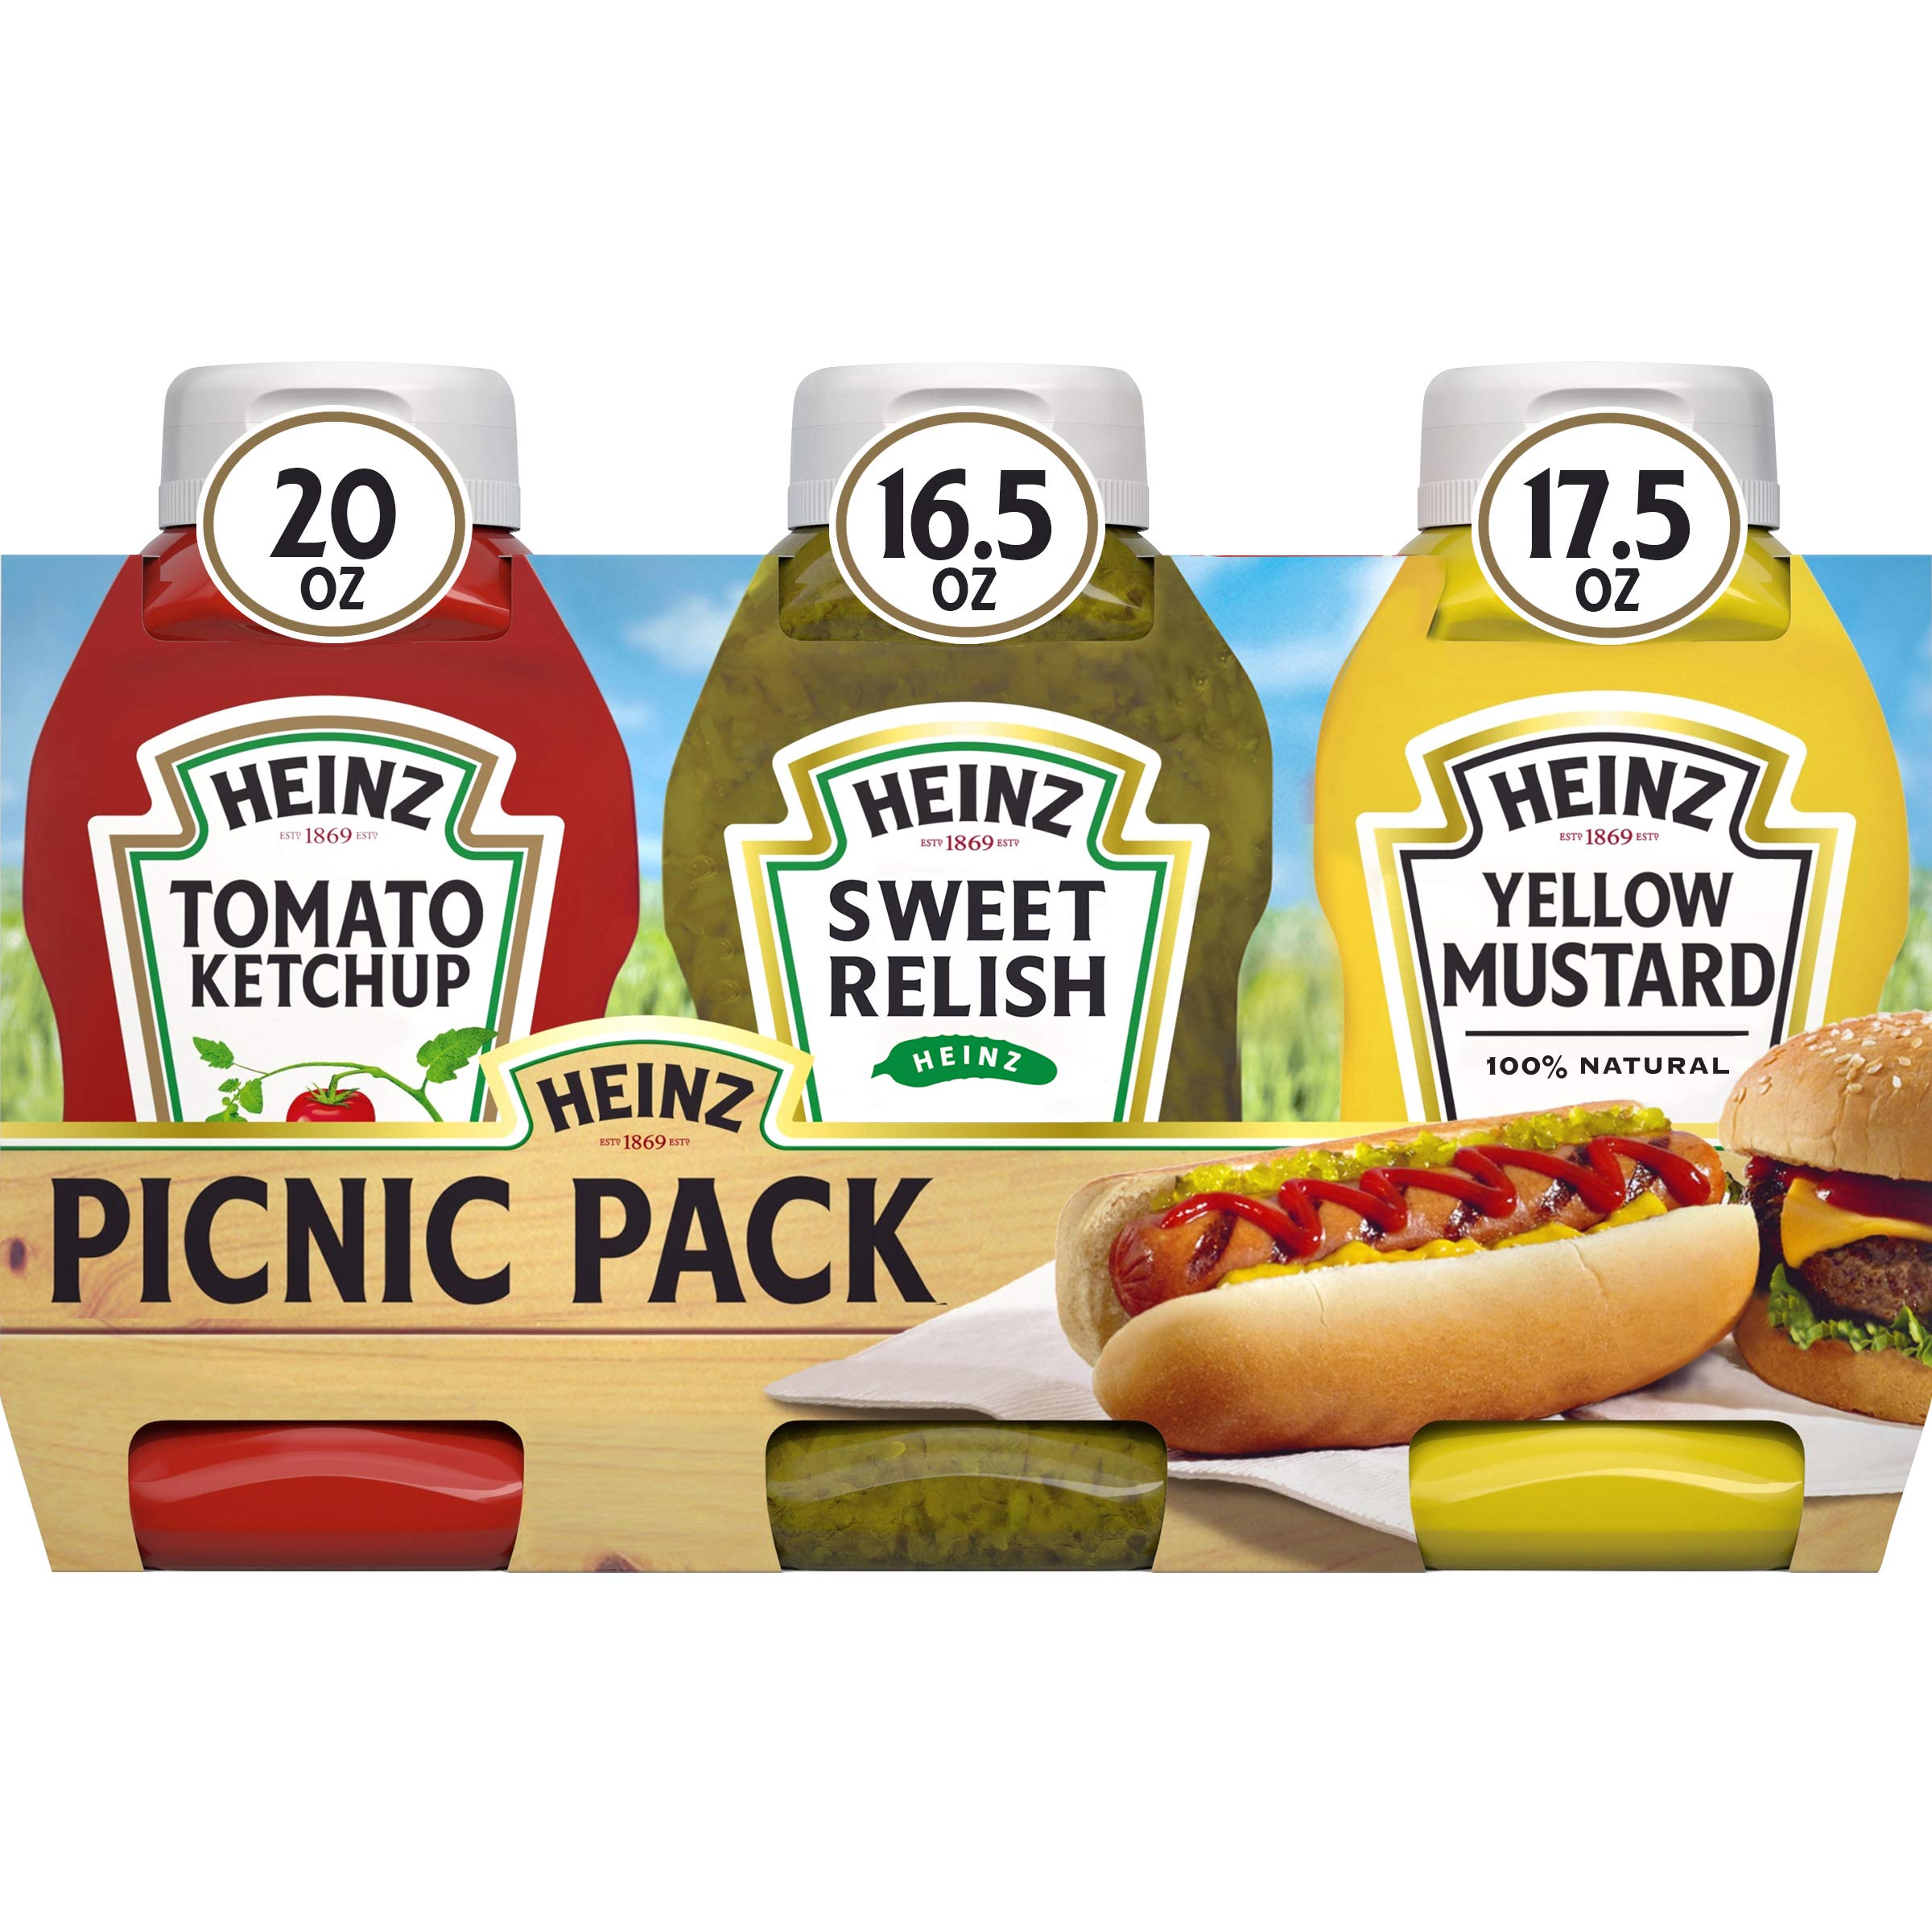 Heinz Picnic Pack (20-Oz Ketchup, 16.5-Oz Sweet Relish, 17.5-Oz Yellow Mustard) YMMV - $4.78 or less w/ Subscribe & Save